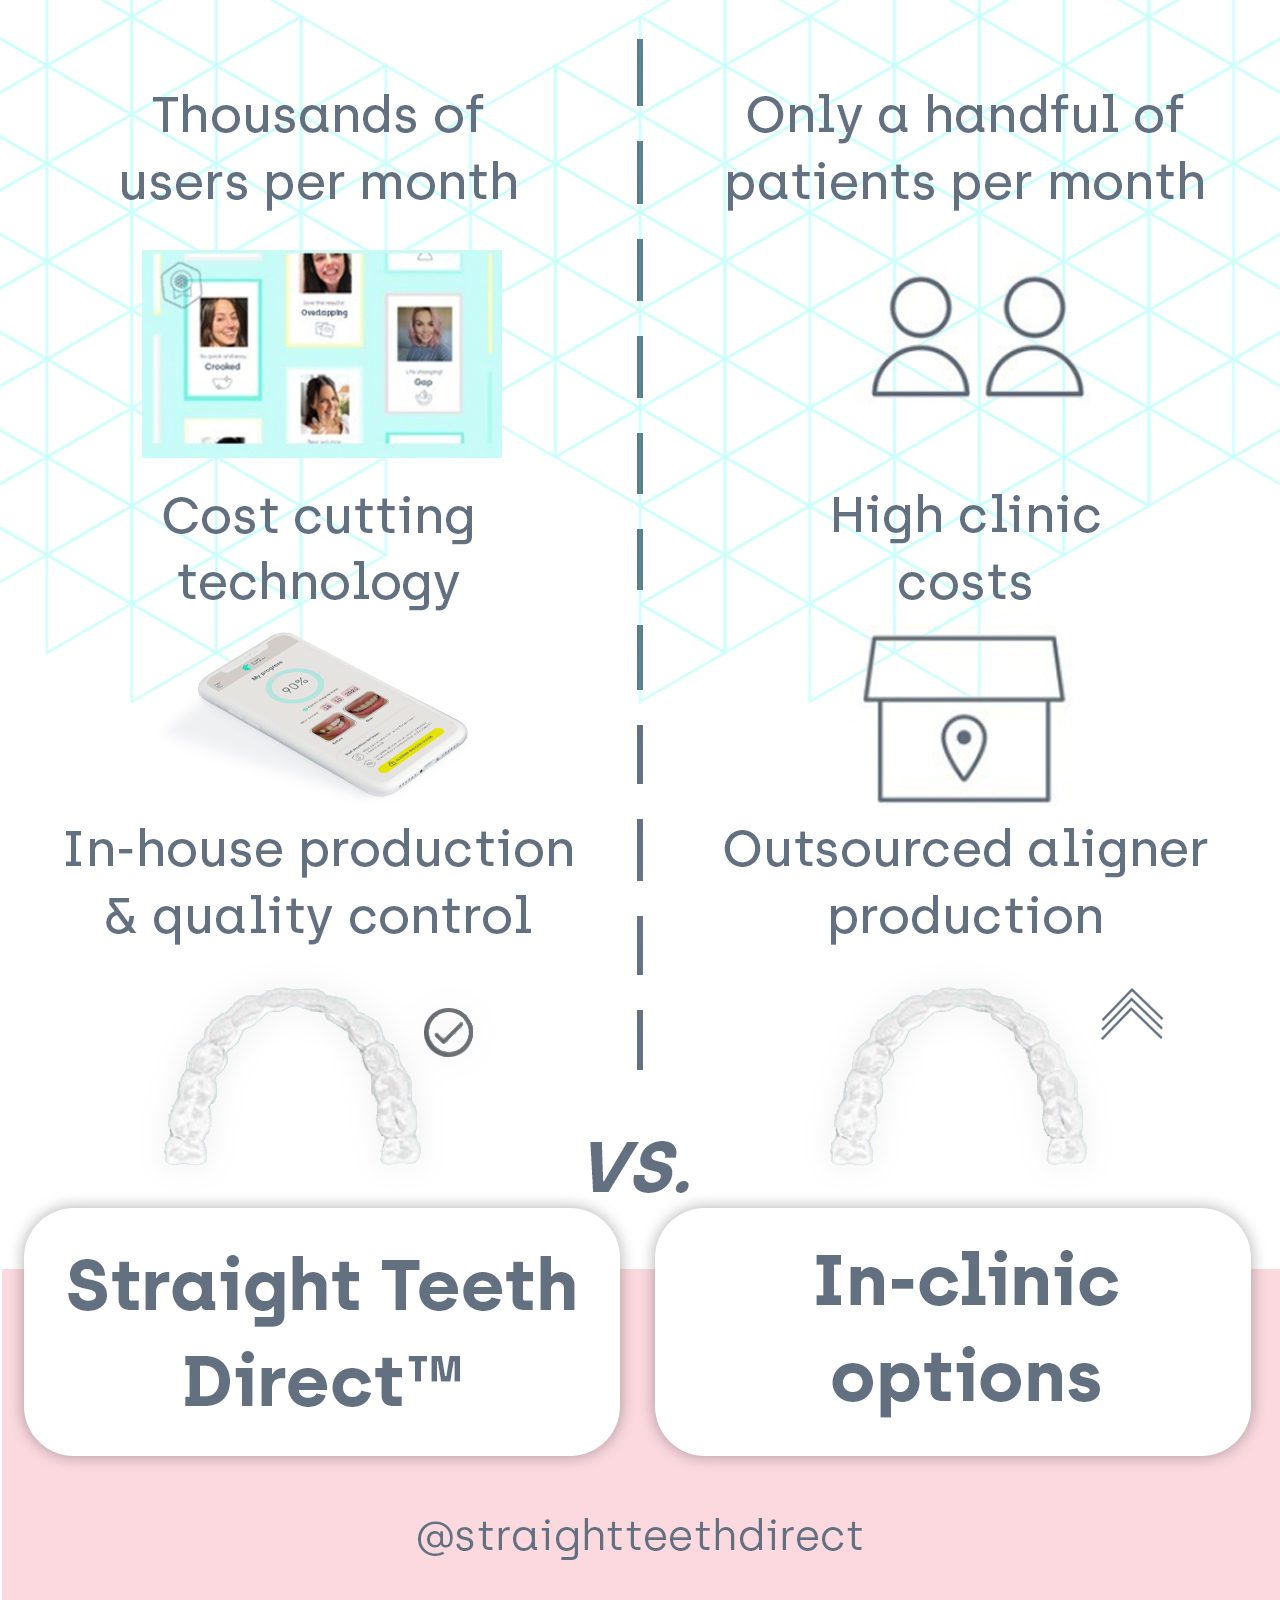 straight teeth direct vs in-clinic options